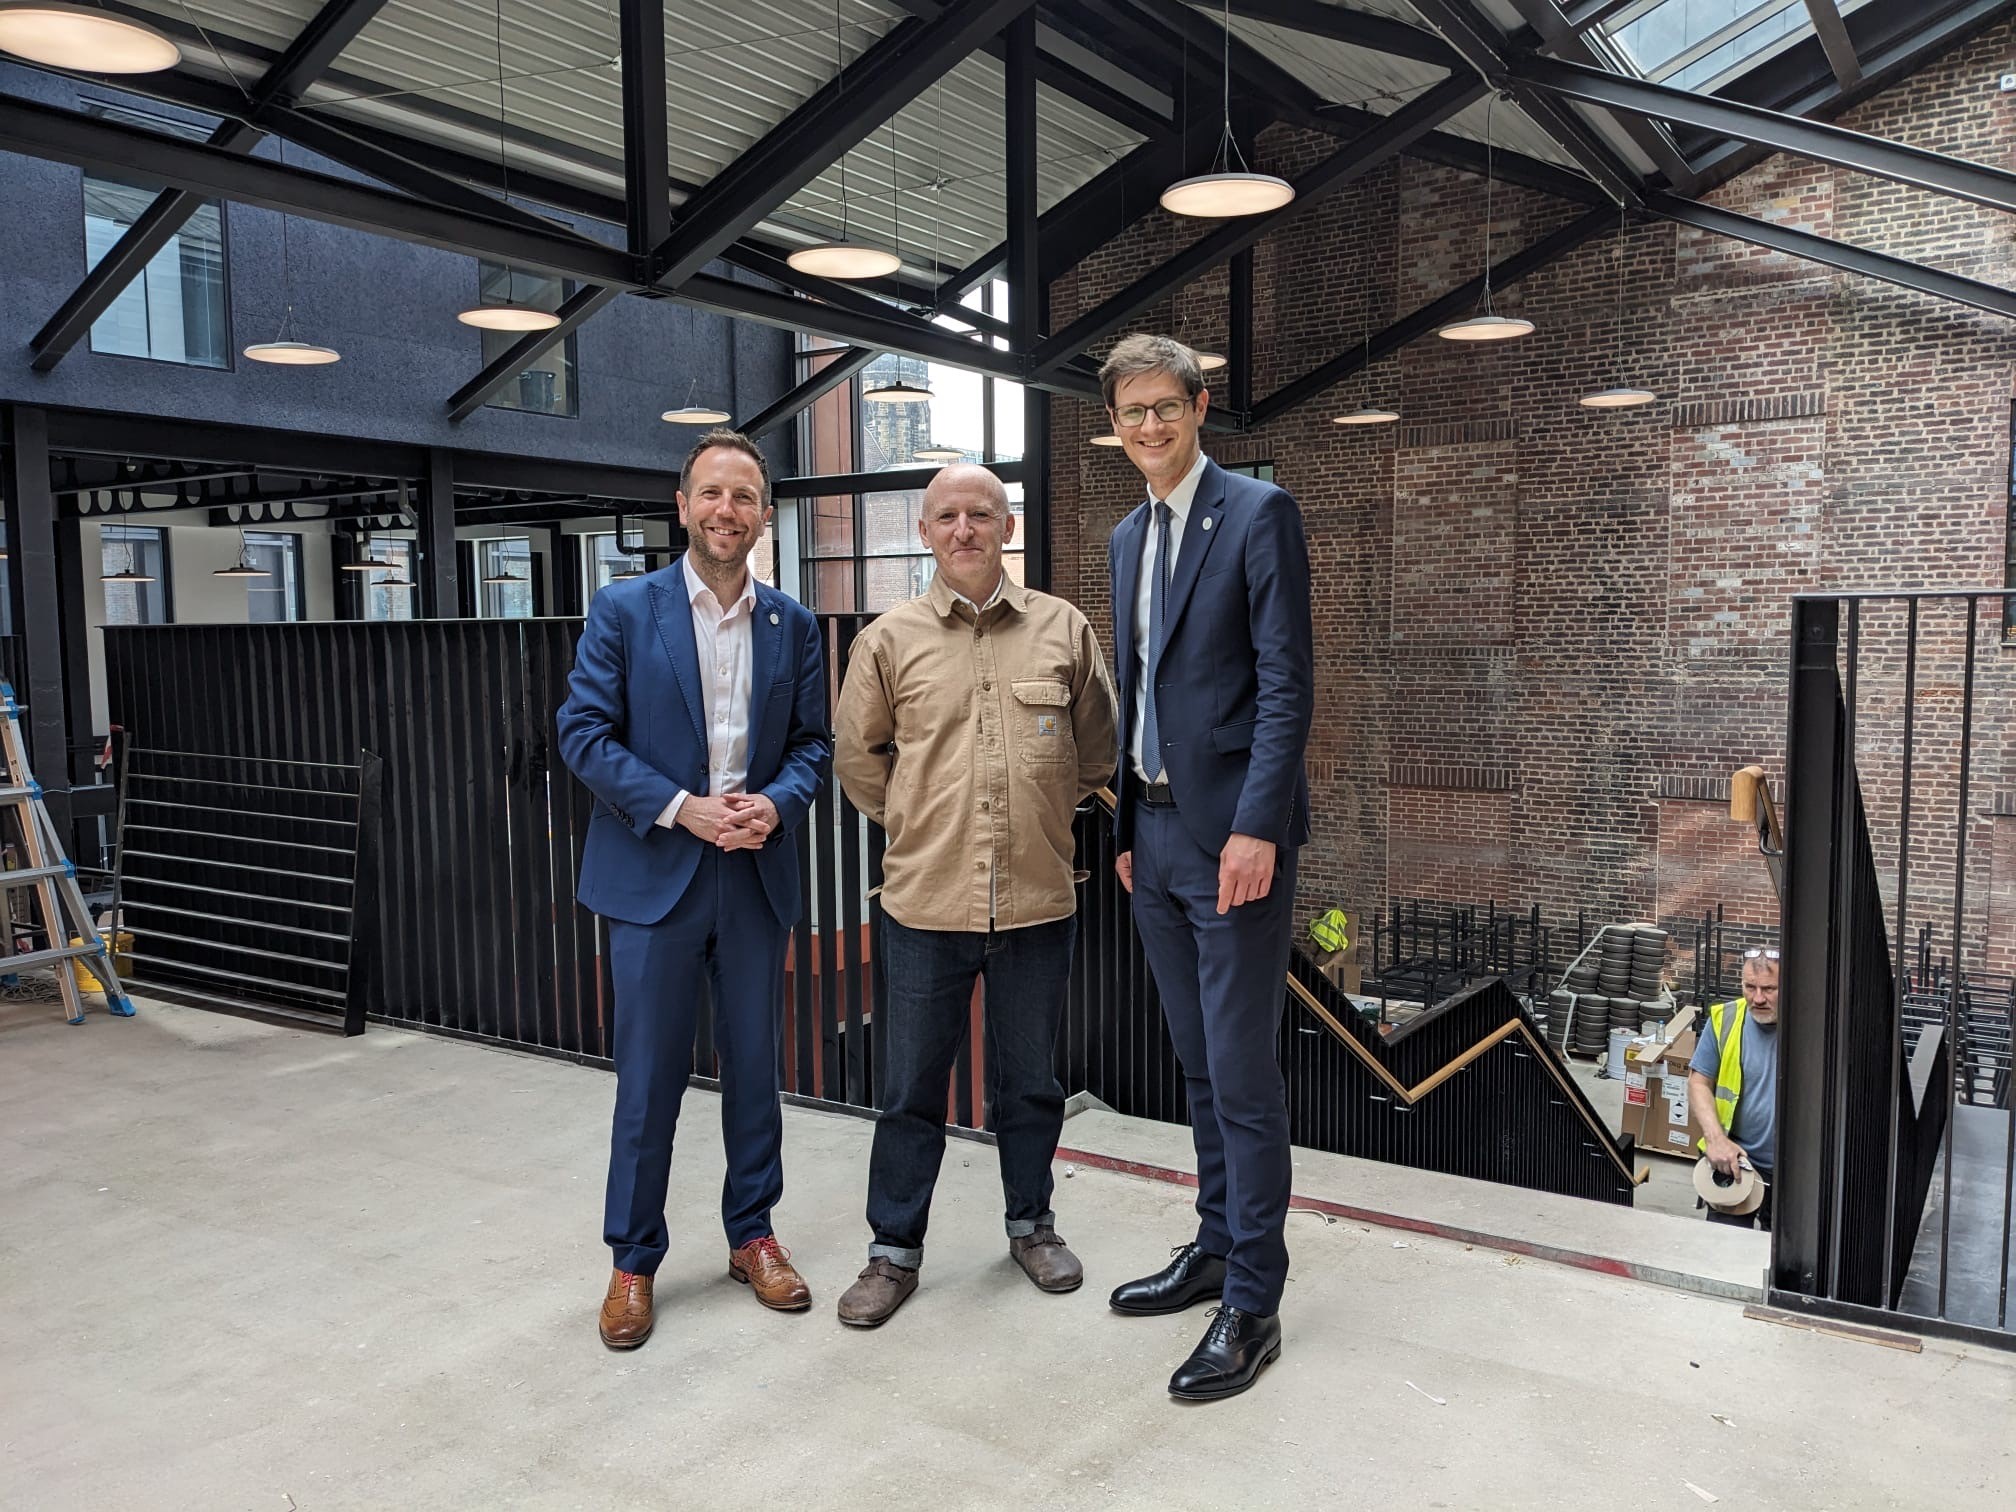 Cllr Ben Miskell, Matt Bigland and Cllr Tom Hunt stand on the first floor of Cambridge Street Collective food hall.